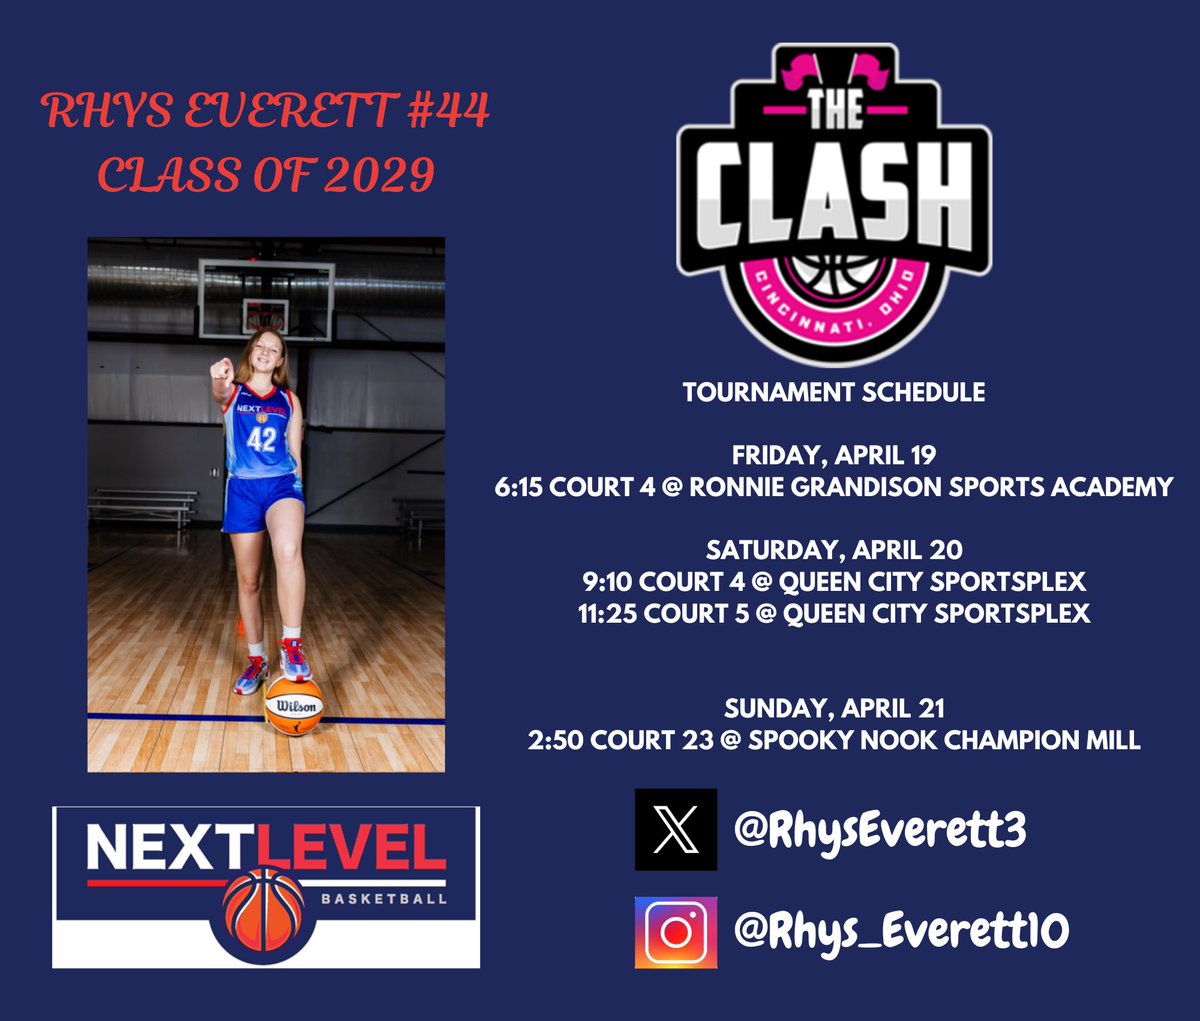 Come check out our 2029 @NextLevelNKY team this weekend. @alyxwhite_ @PGHKentucky @PGHAkeem @PrepGirlsHoops @_Lady_Cougars_